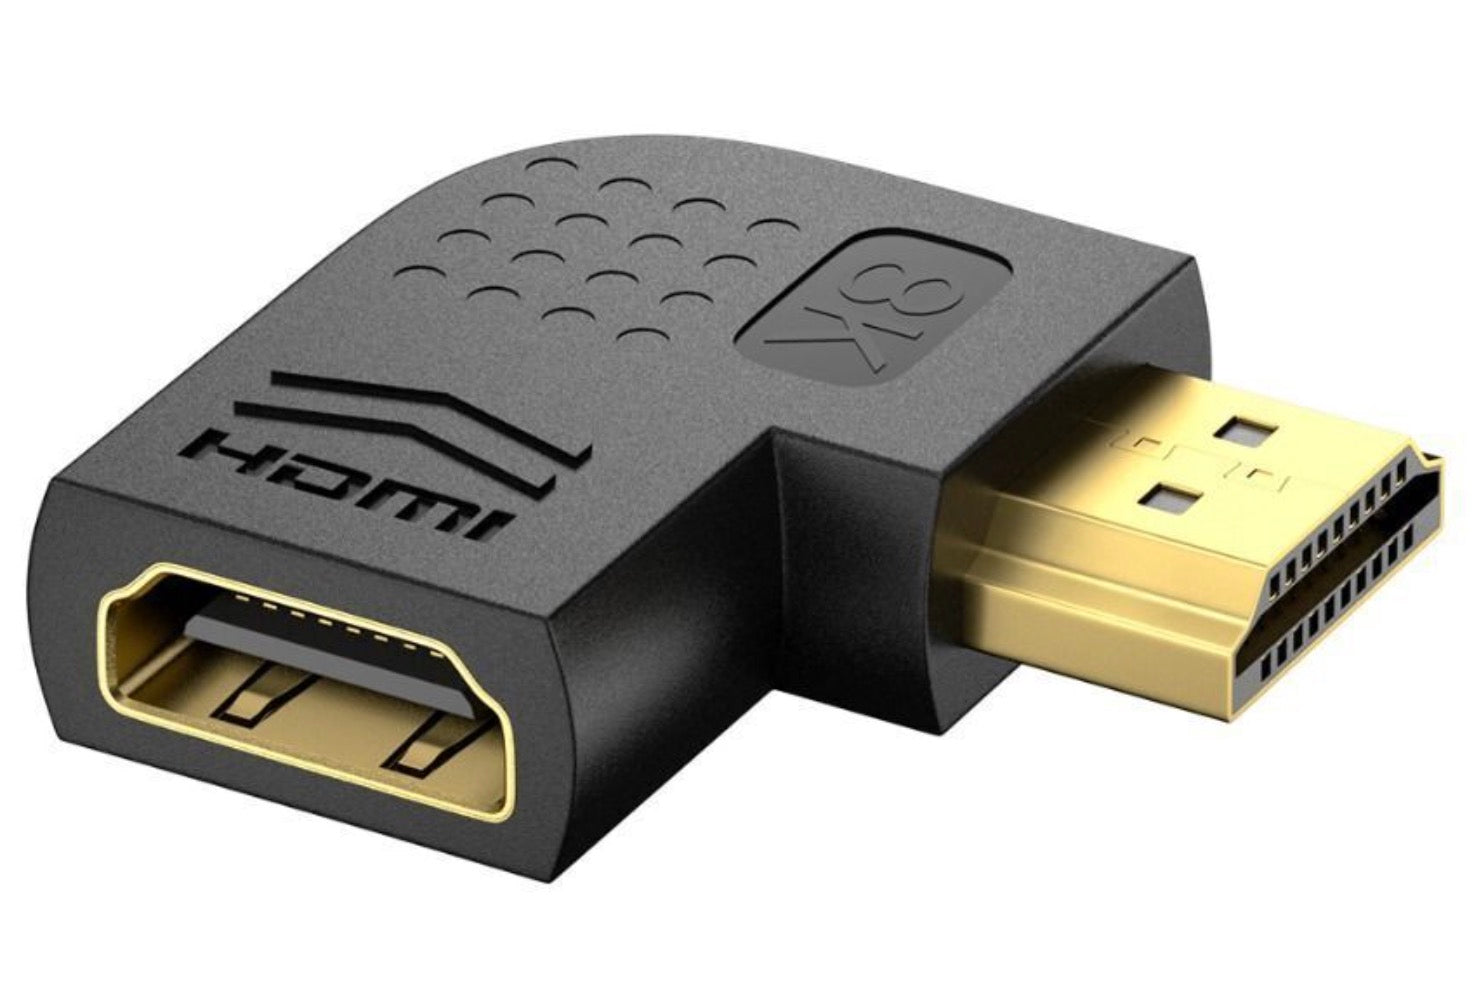 HDMI 2.1 Male to Female Extension Converter Adapter 8K@60Hz